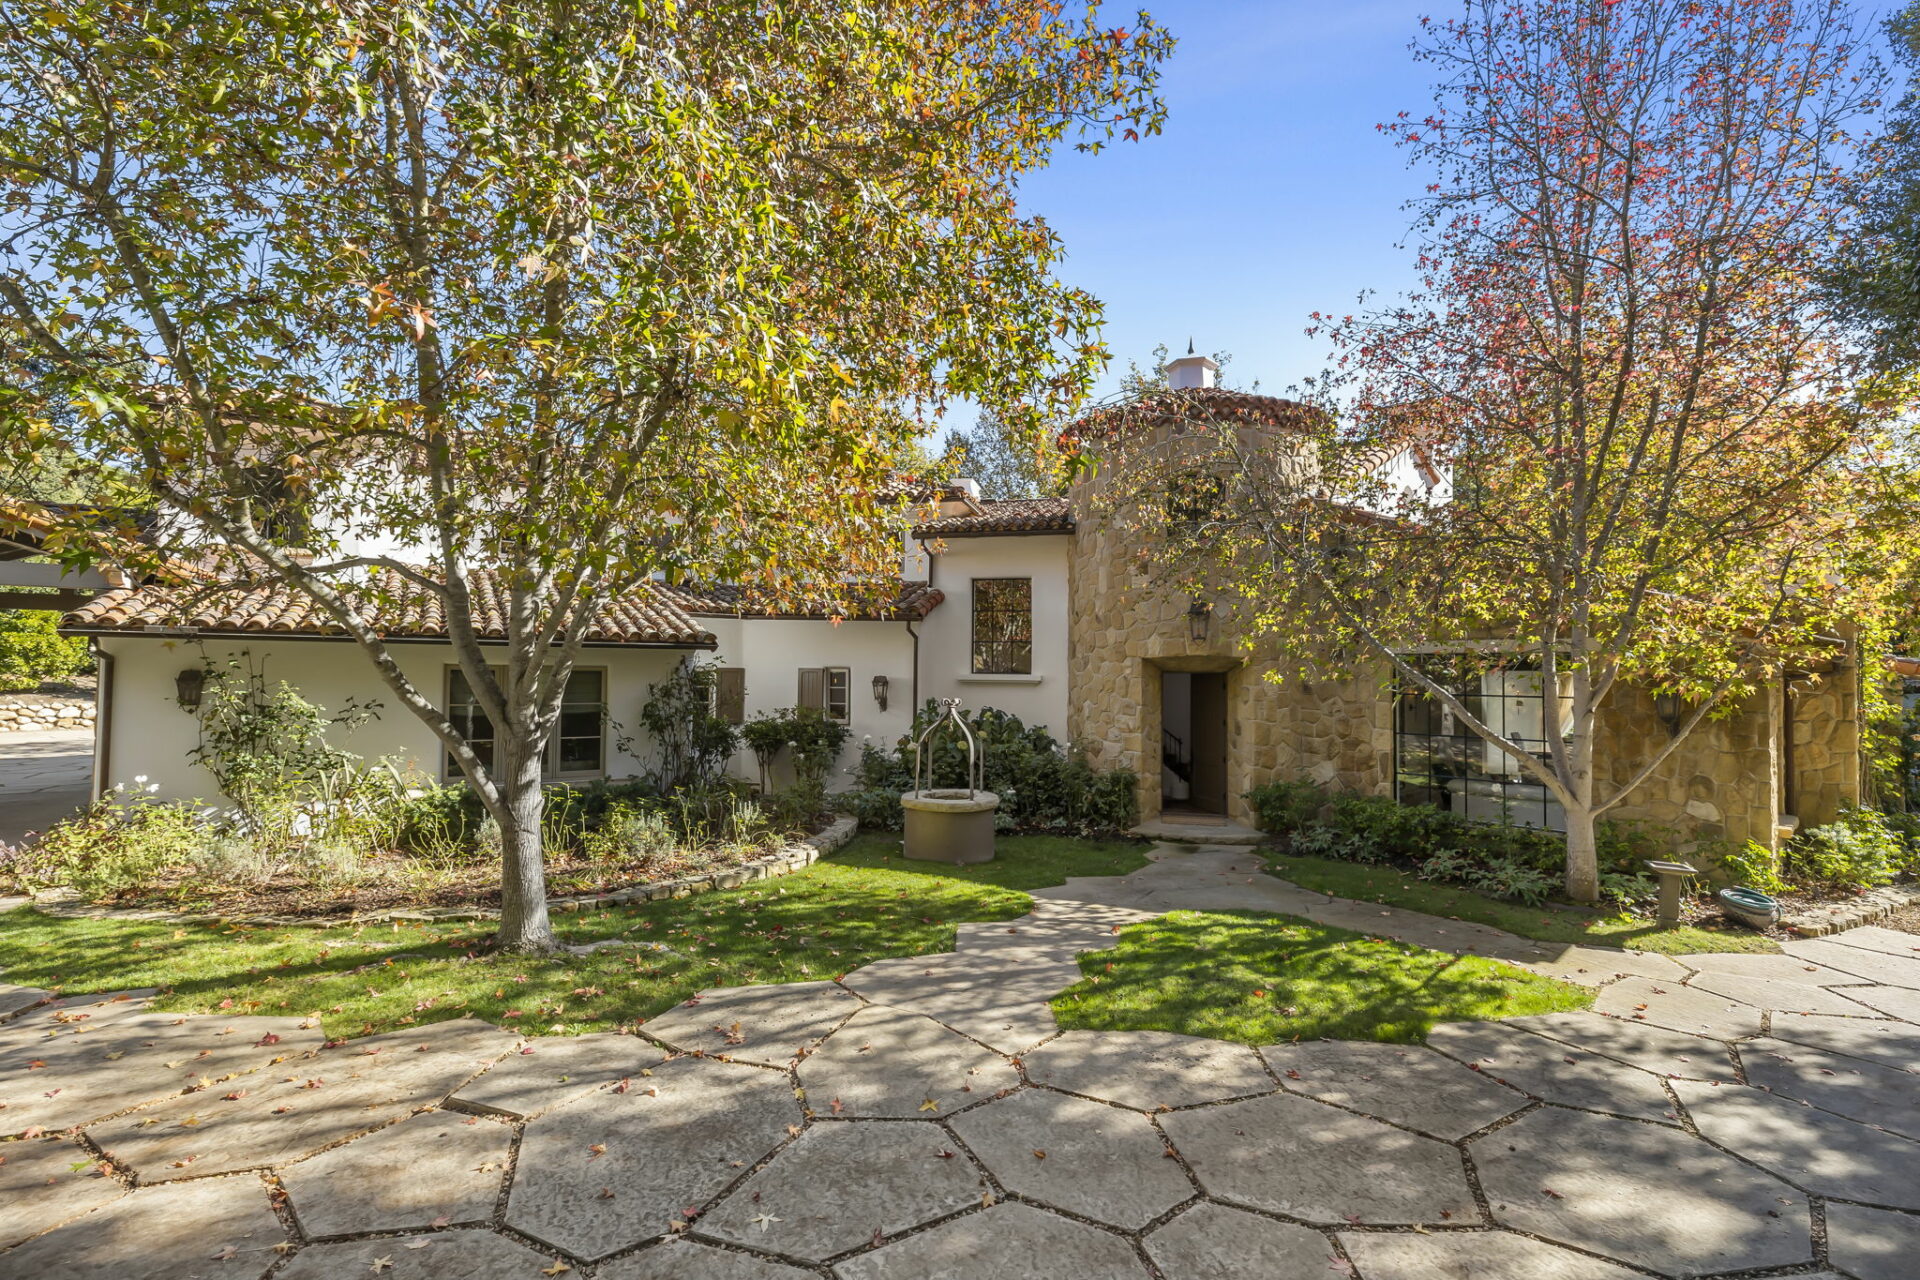 A mediterranean-style house with a stone driveway and surrounding autumn foliage.